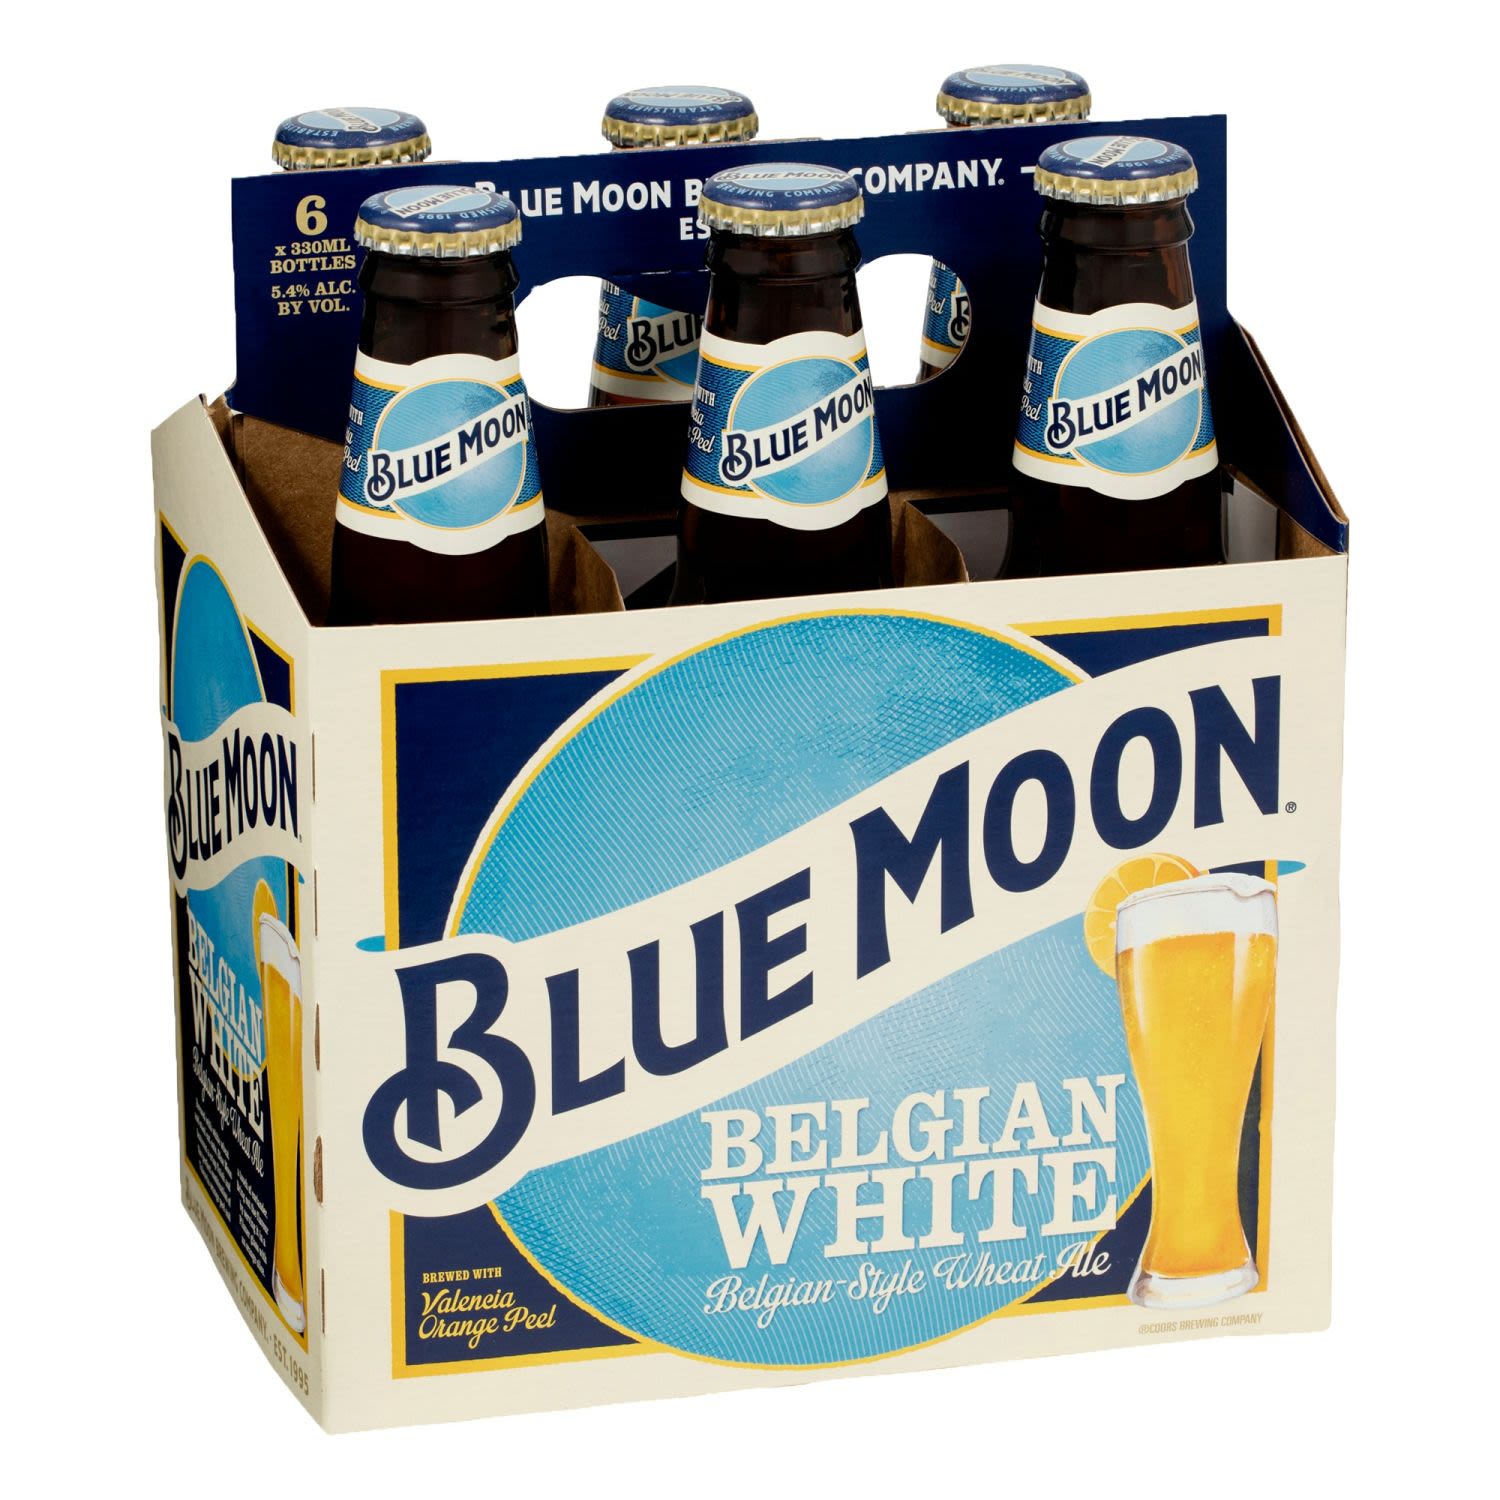 Blue Moon is a delicious handcrafted beer.<br /> <br />Alcohol Volume: 5.40%<br /><br />Pack Format: 6 Pack<br /><br />Standard Drinks: 1.5</br /><br />Pack Type: Bottle<br /><br />Country of Origin: USA<br />